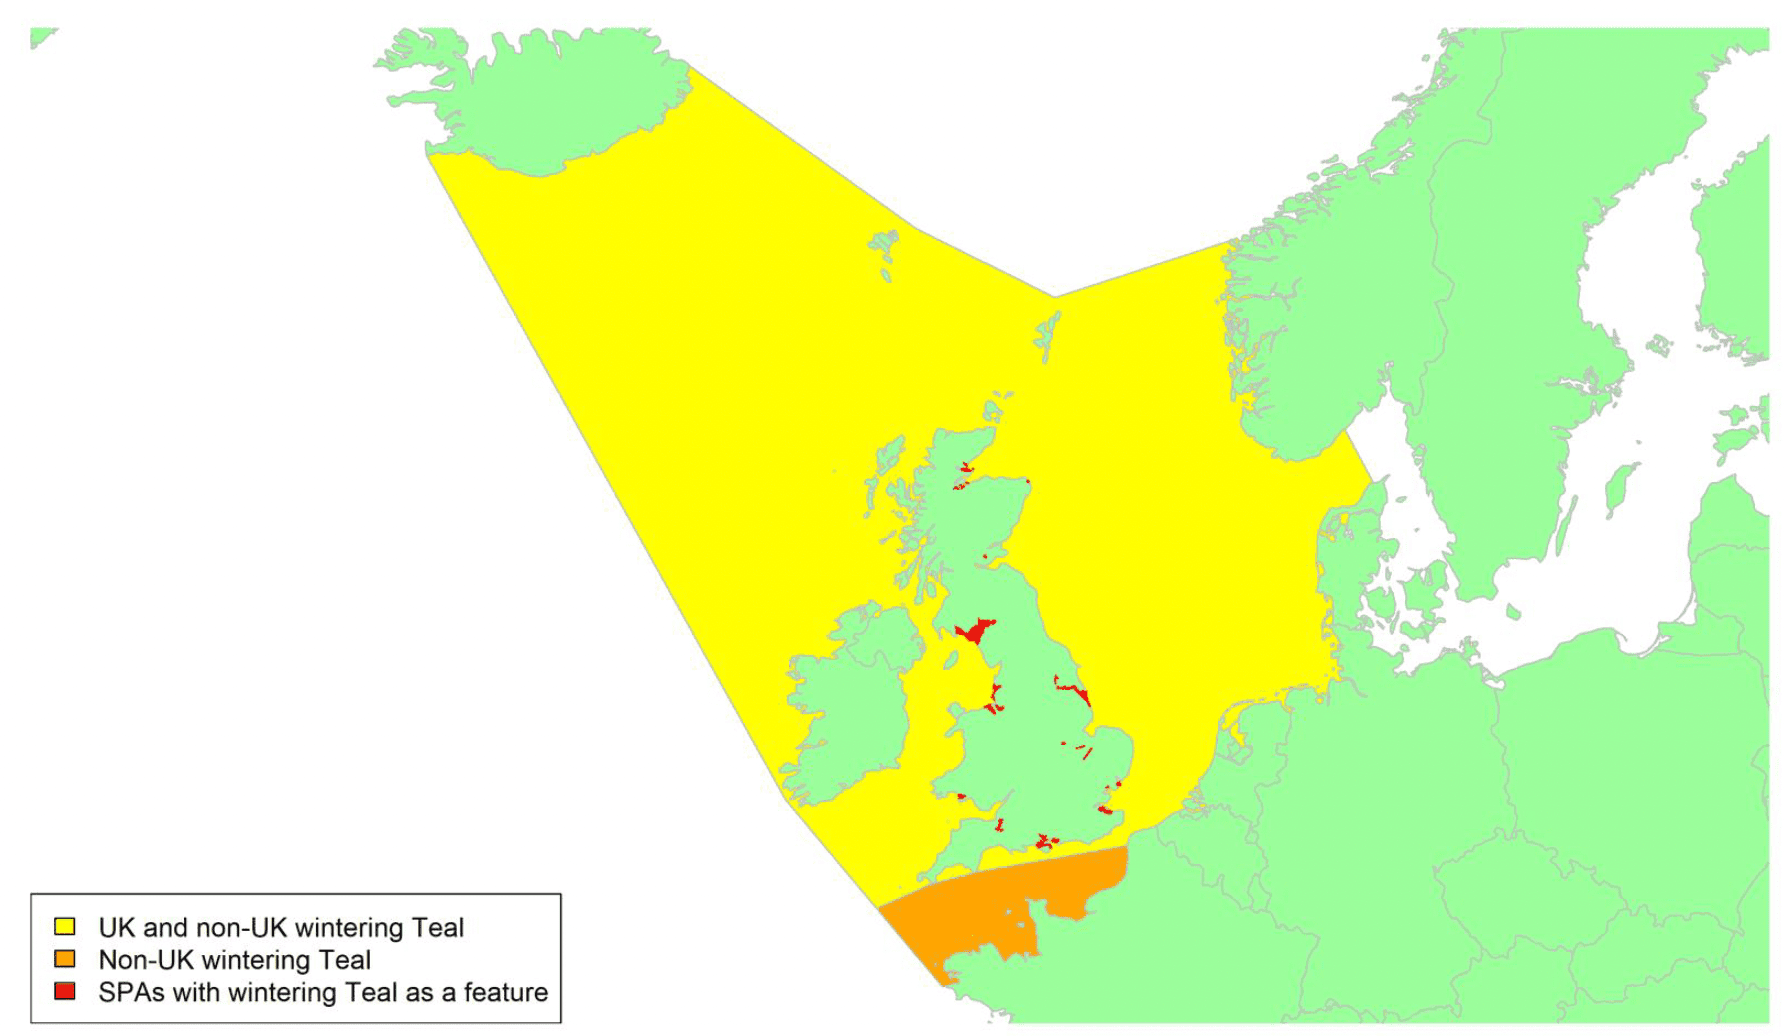 Map of North West Europe showing migratory routes and SPAs within the UK for wintering Teal as described in the text below.